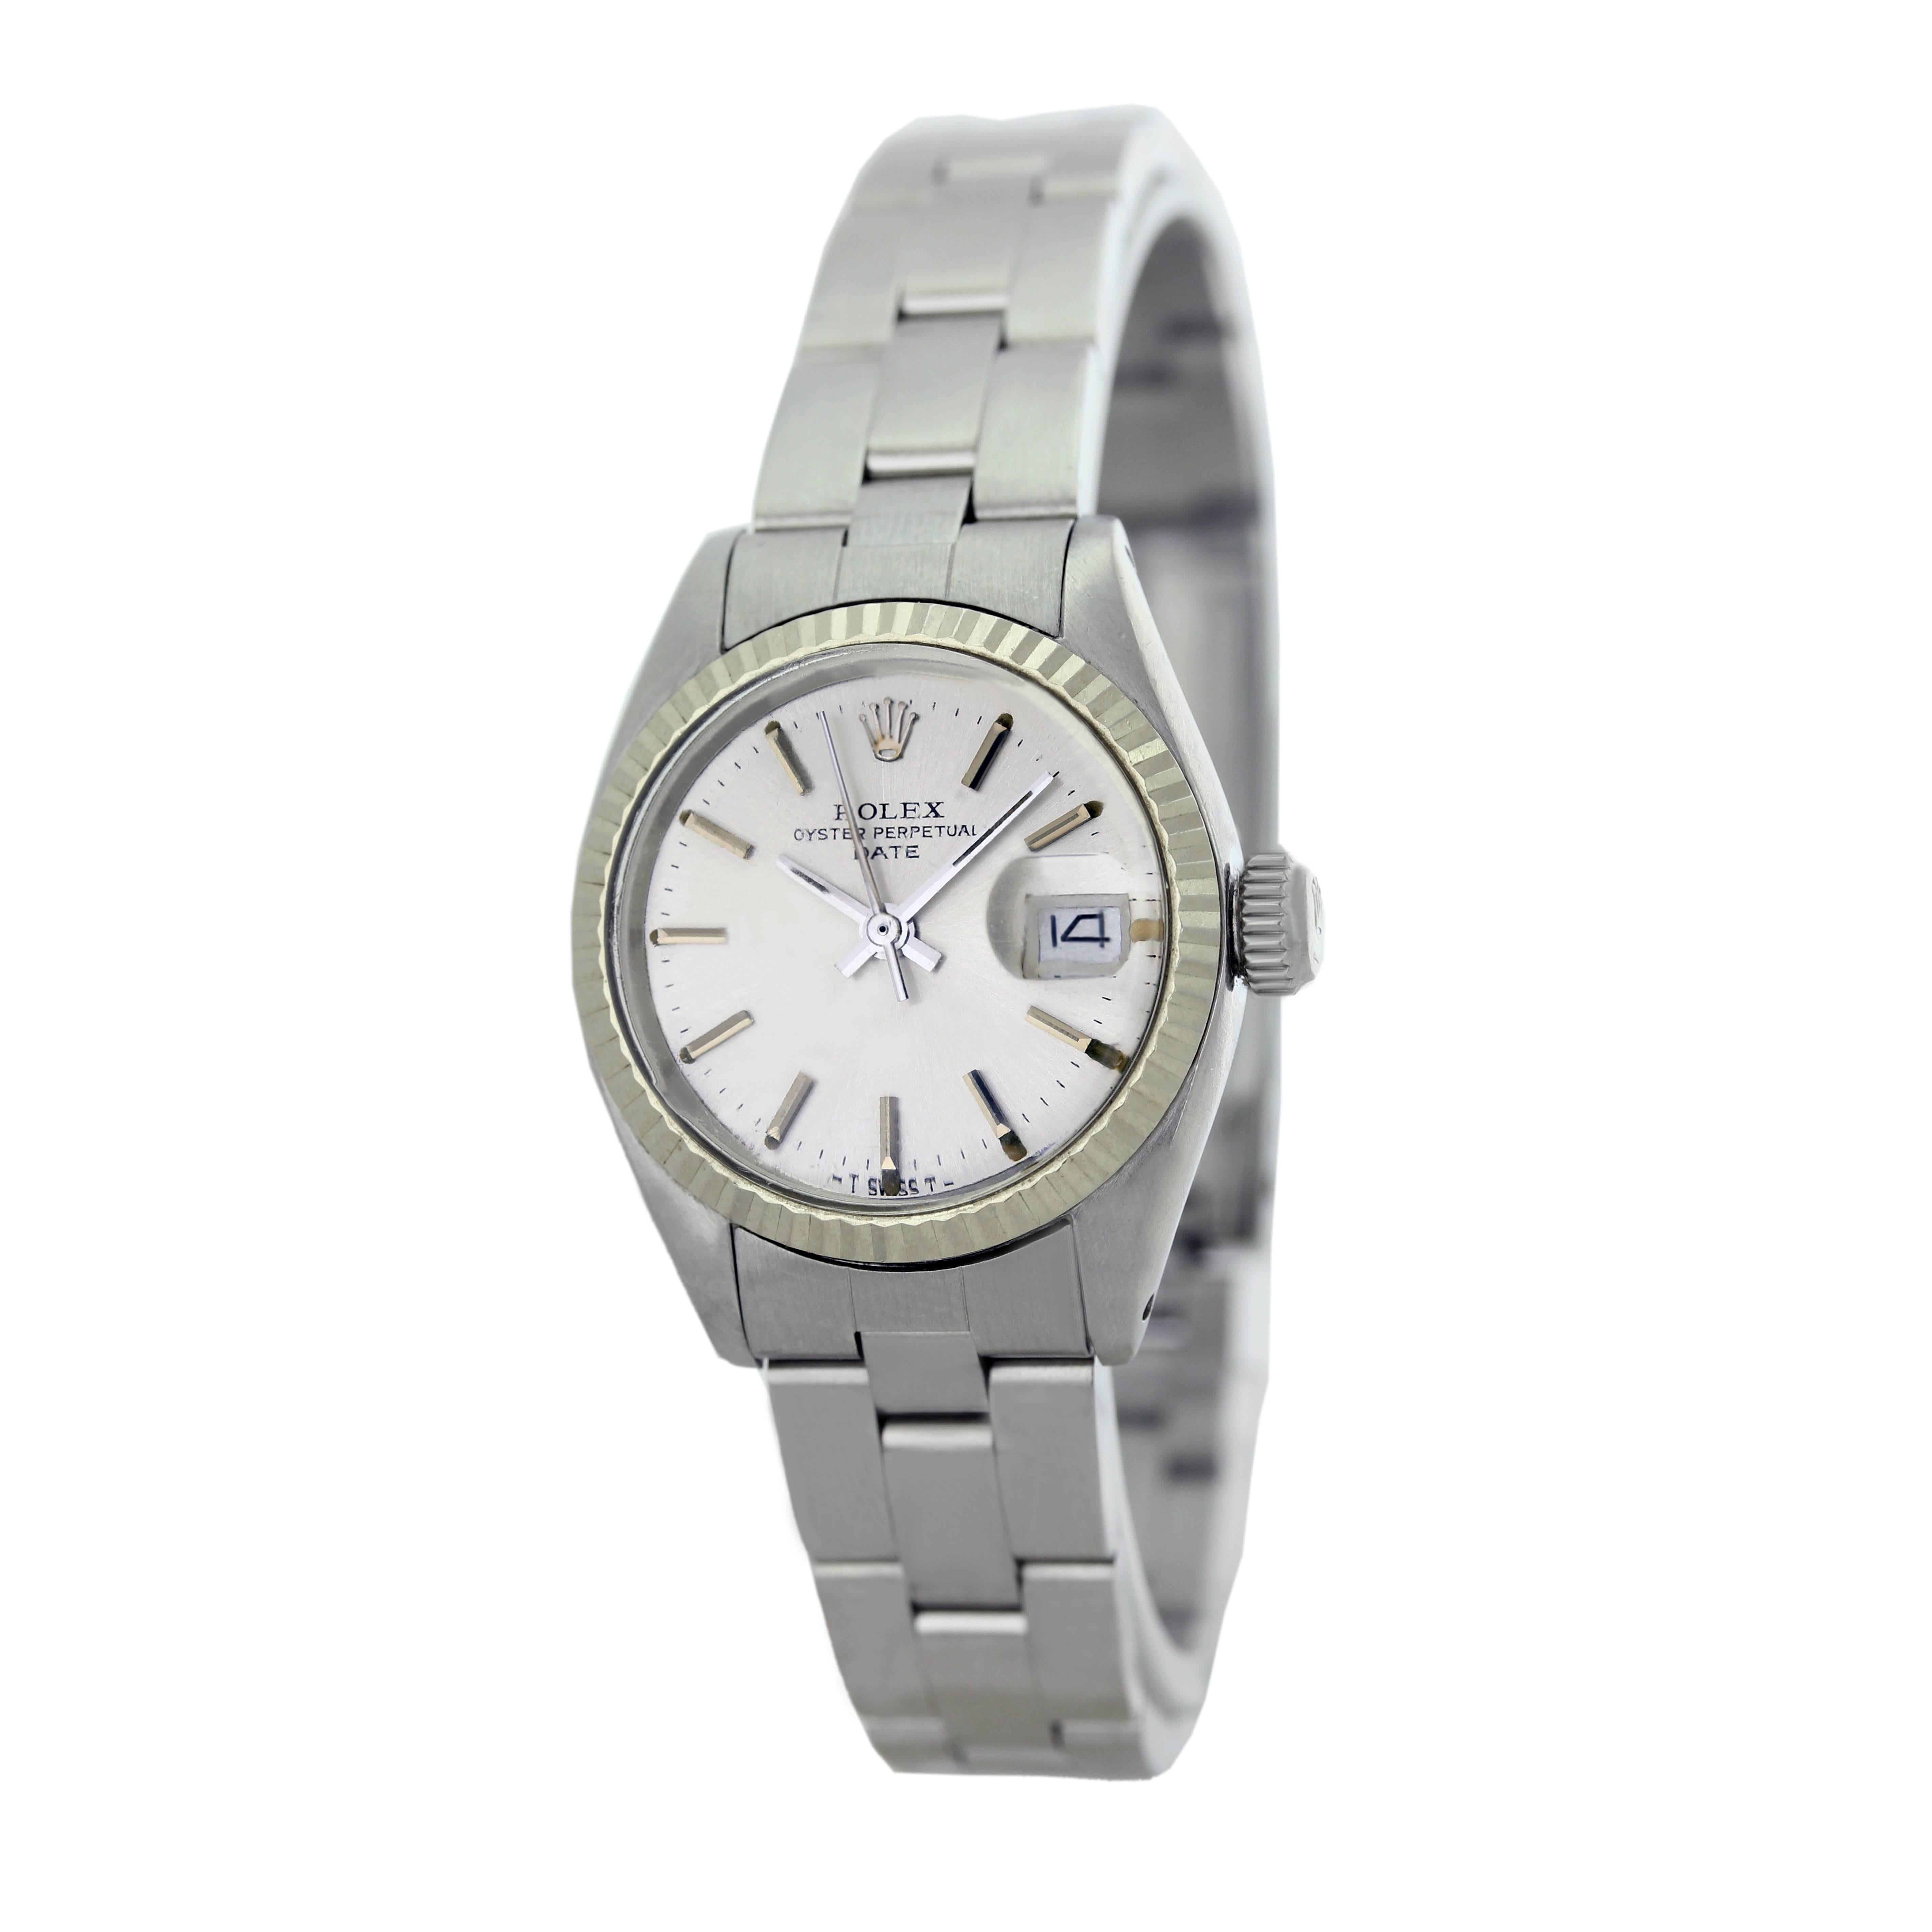 Rolex Lady's Stainless Steel Datejust Automatic Wristwatch Ref 691 For Sale